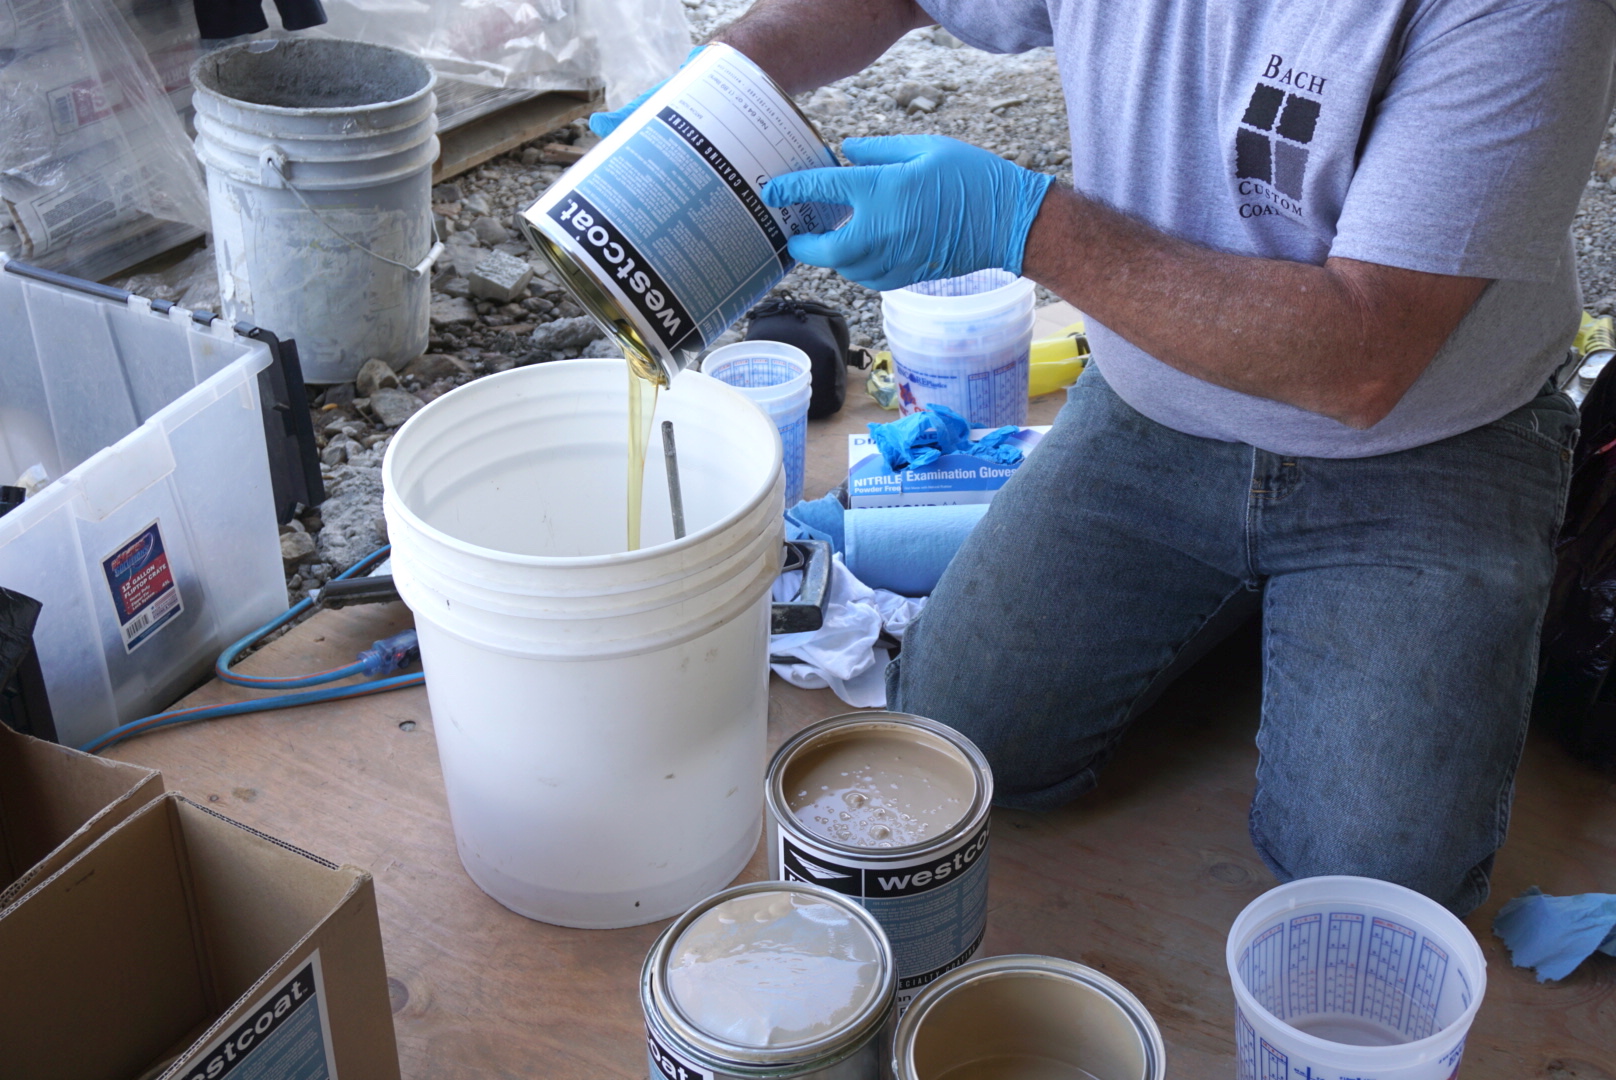 pouring westcoat product in bucket